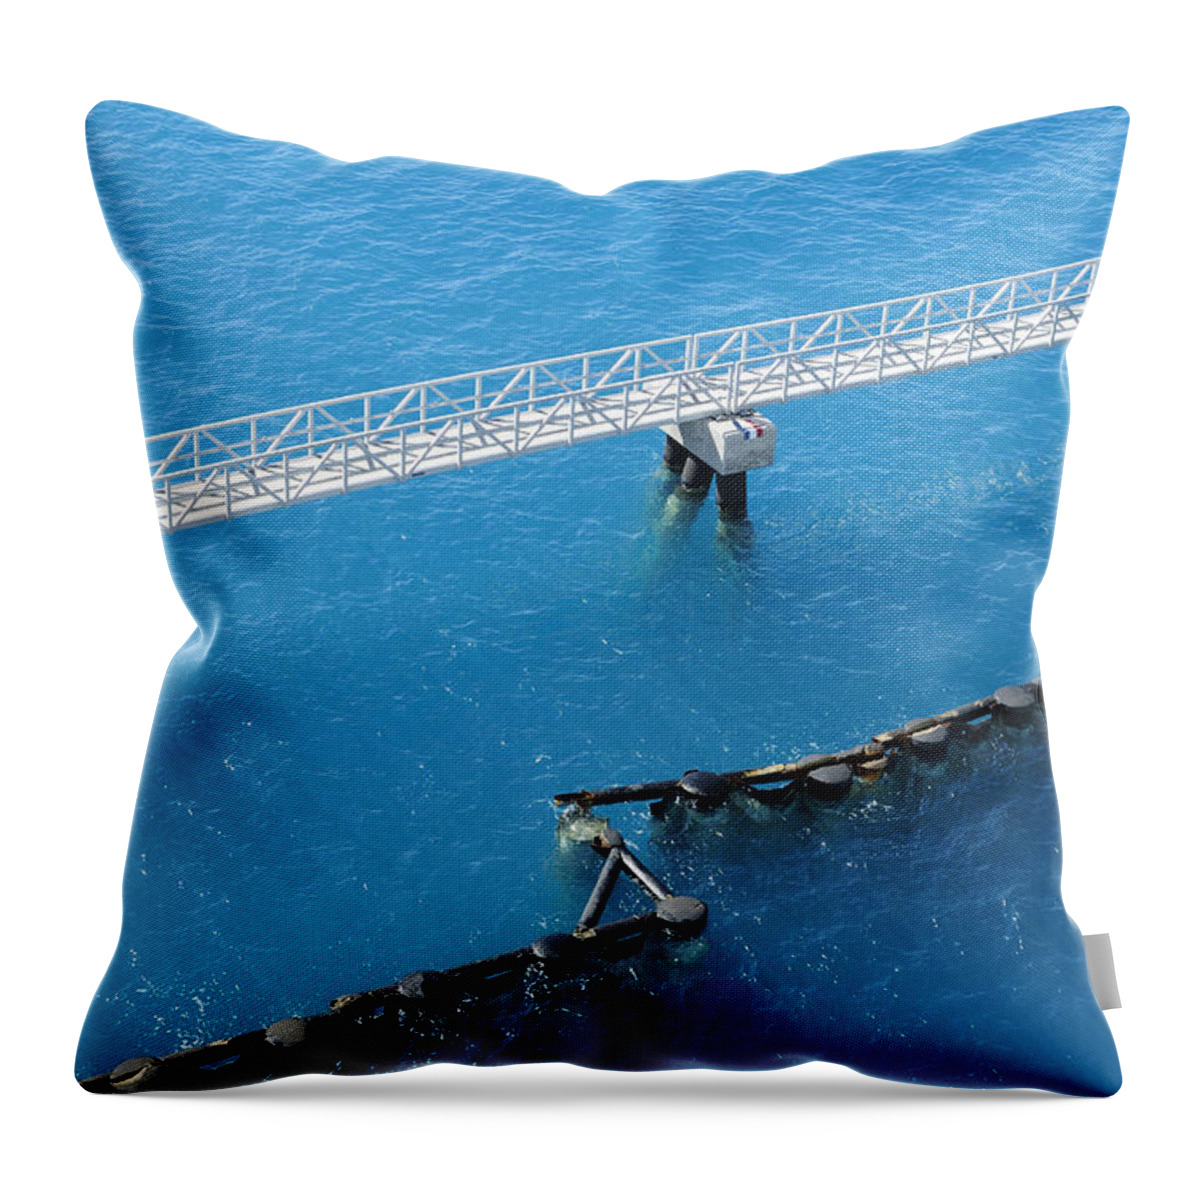 Bermuda Throw Pillow featuring the photograph King's Wharf by Luke Moore